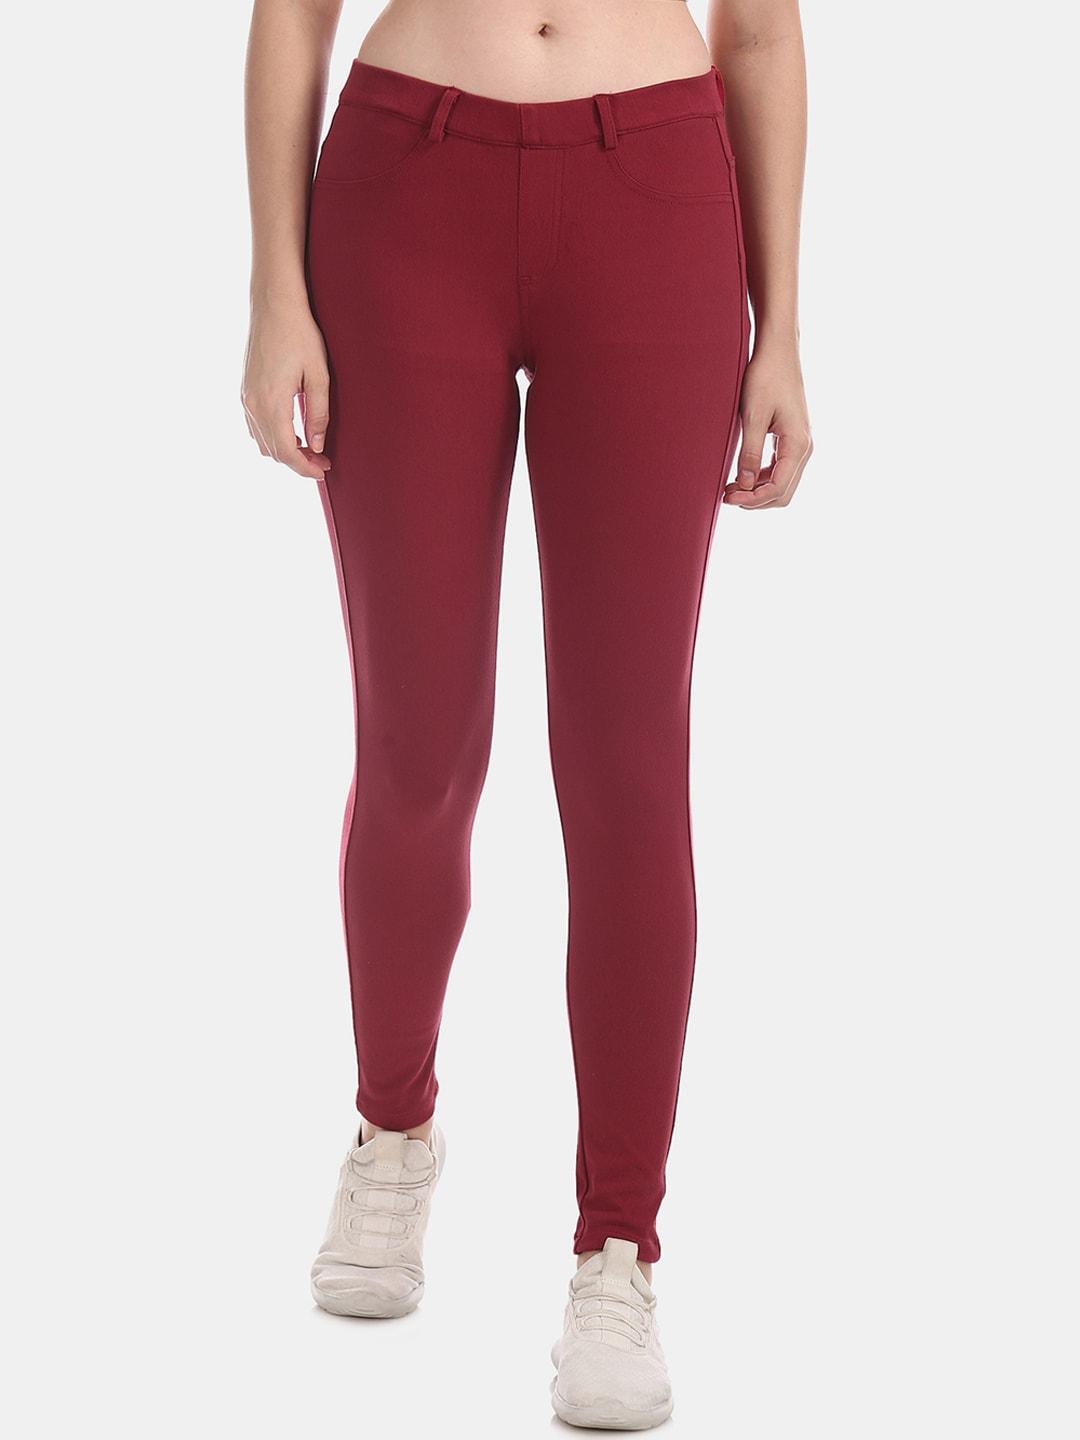 u.s. polo assn. women red slim fit solid treggings